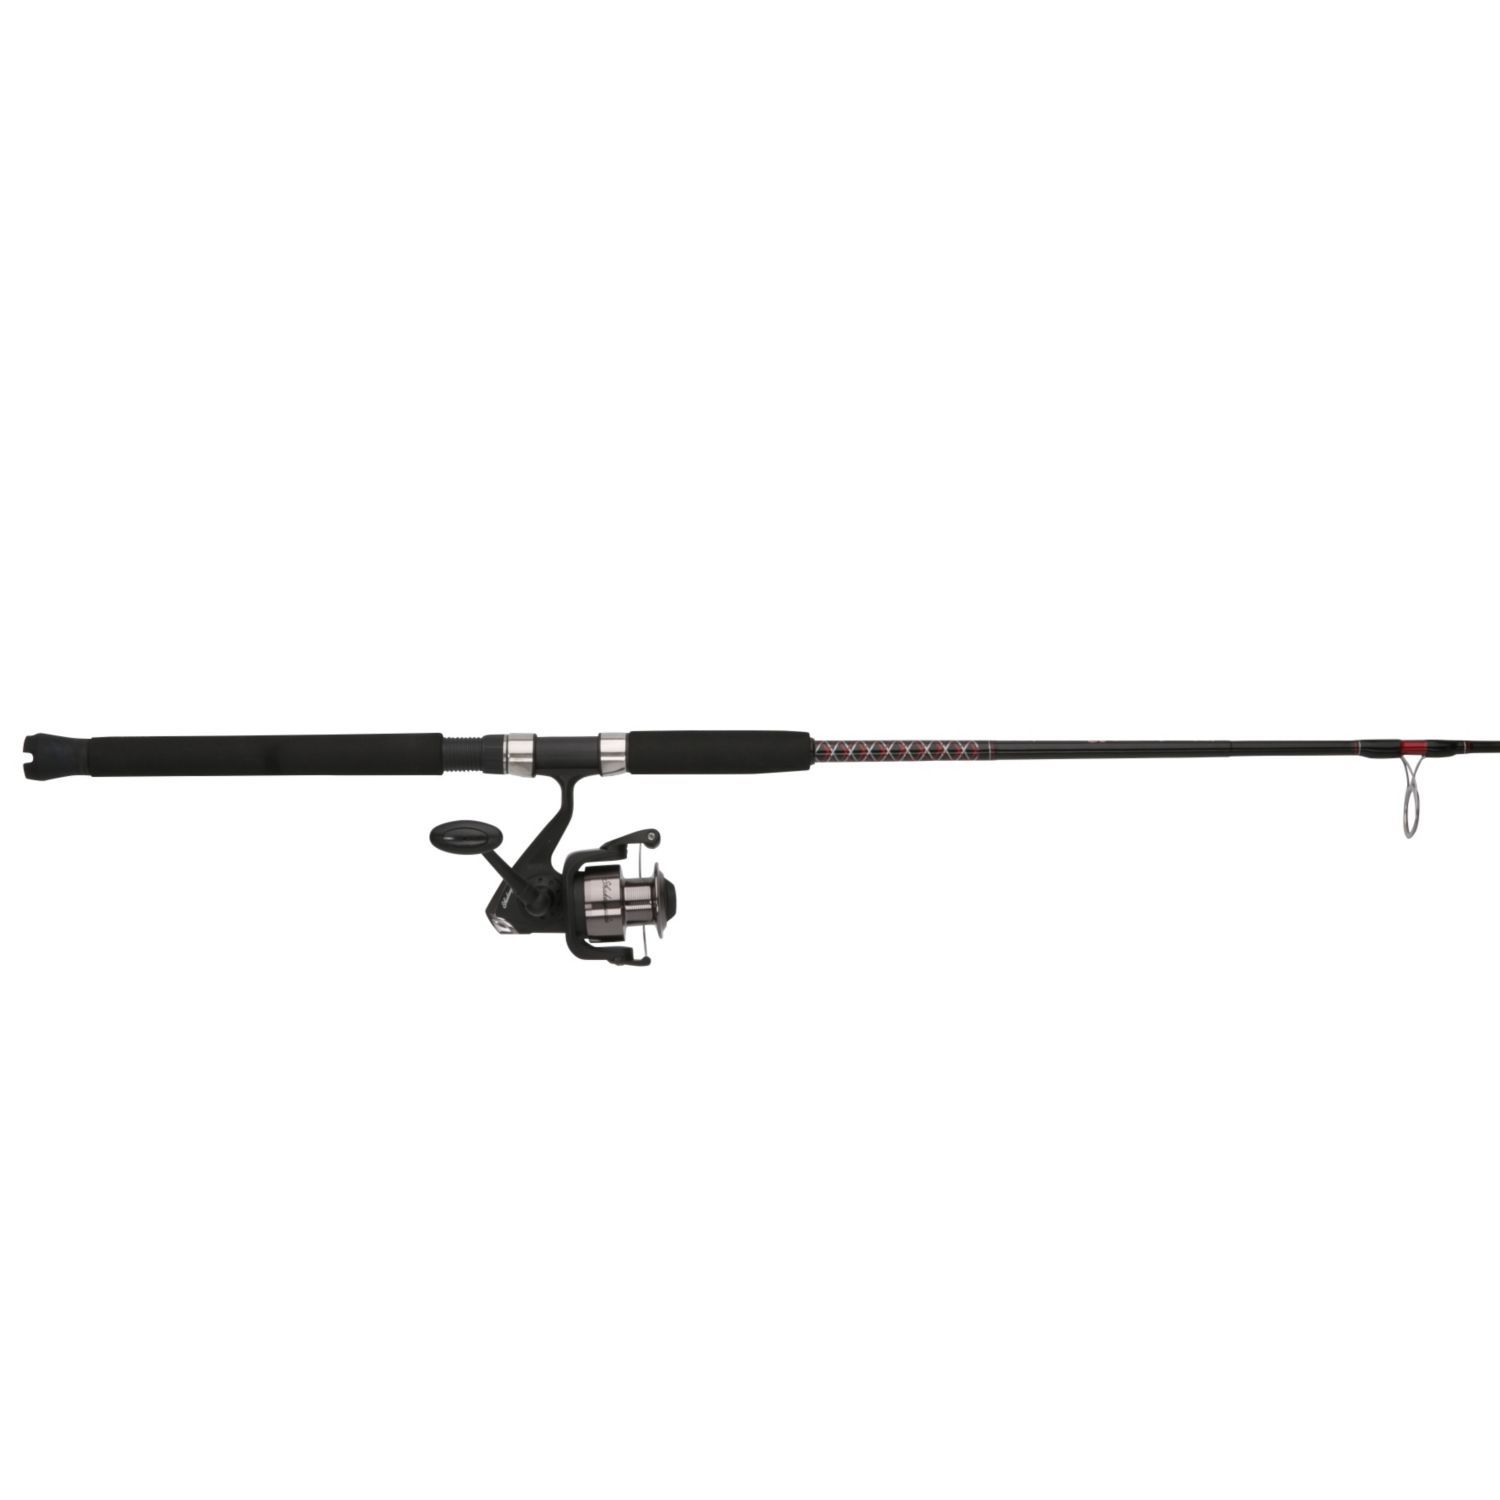 SHAKESPEARE 7' Ugly Stik® Bigwater Spinning Combo